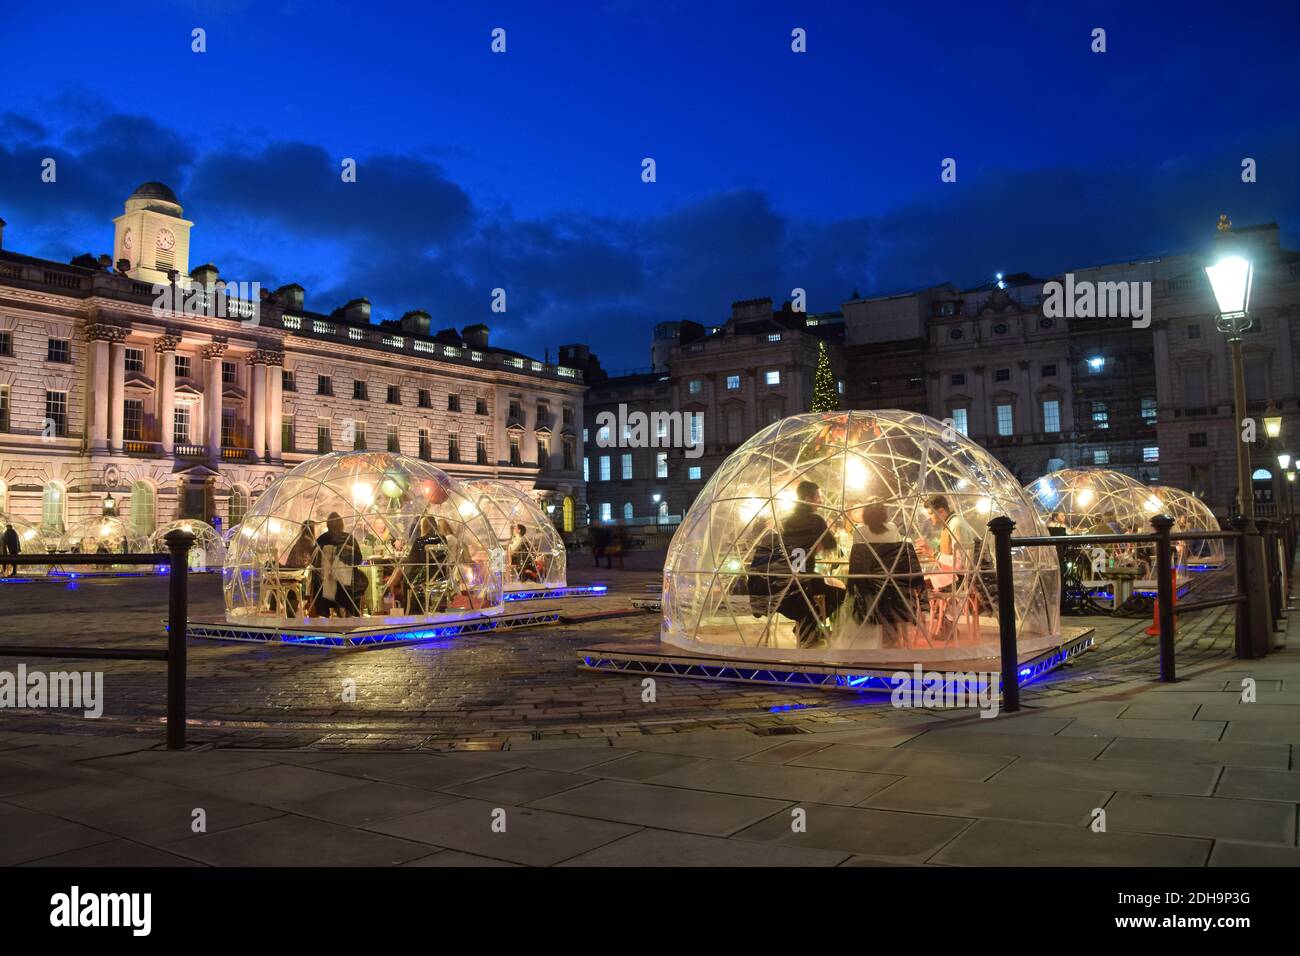 View of Winter Domes at Somerset House in London. The domes, resembling igloos, are installed in the courtyard for indoor private dining during the winter months. Stock Photo